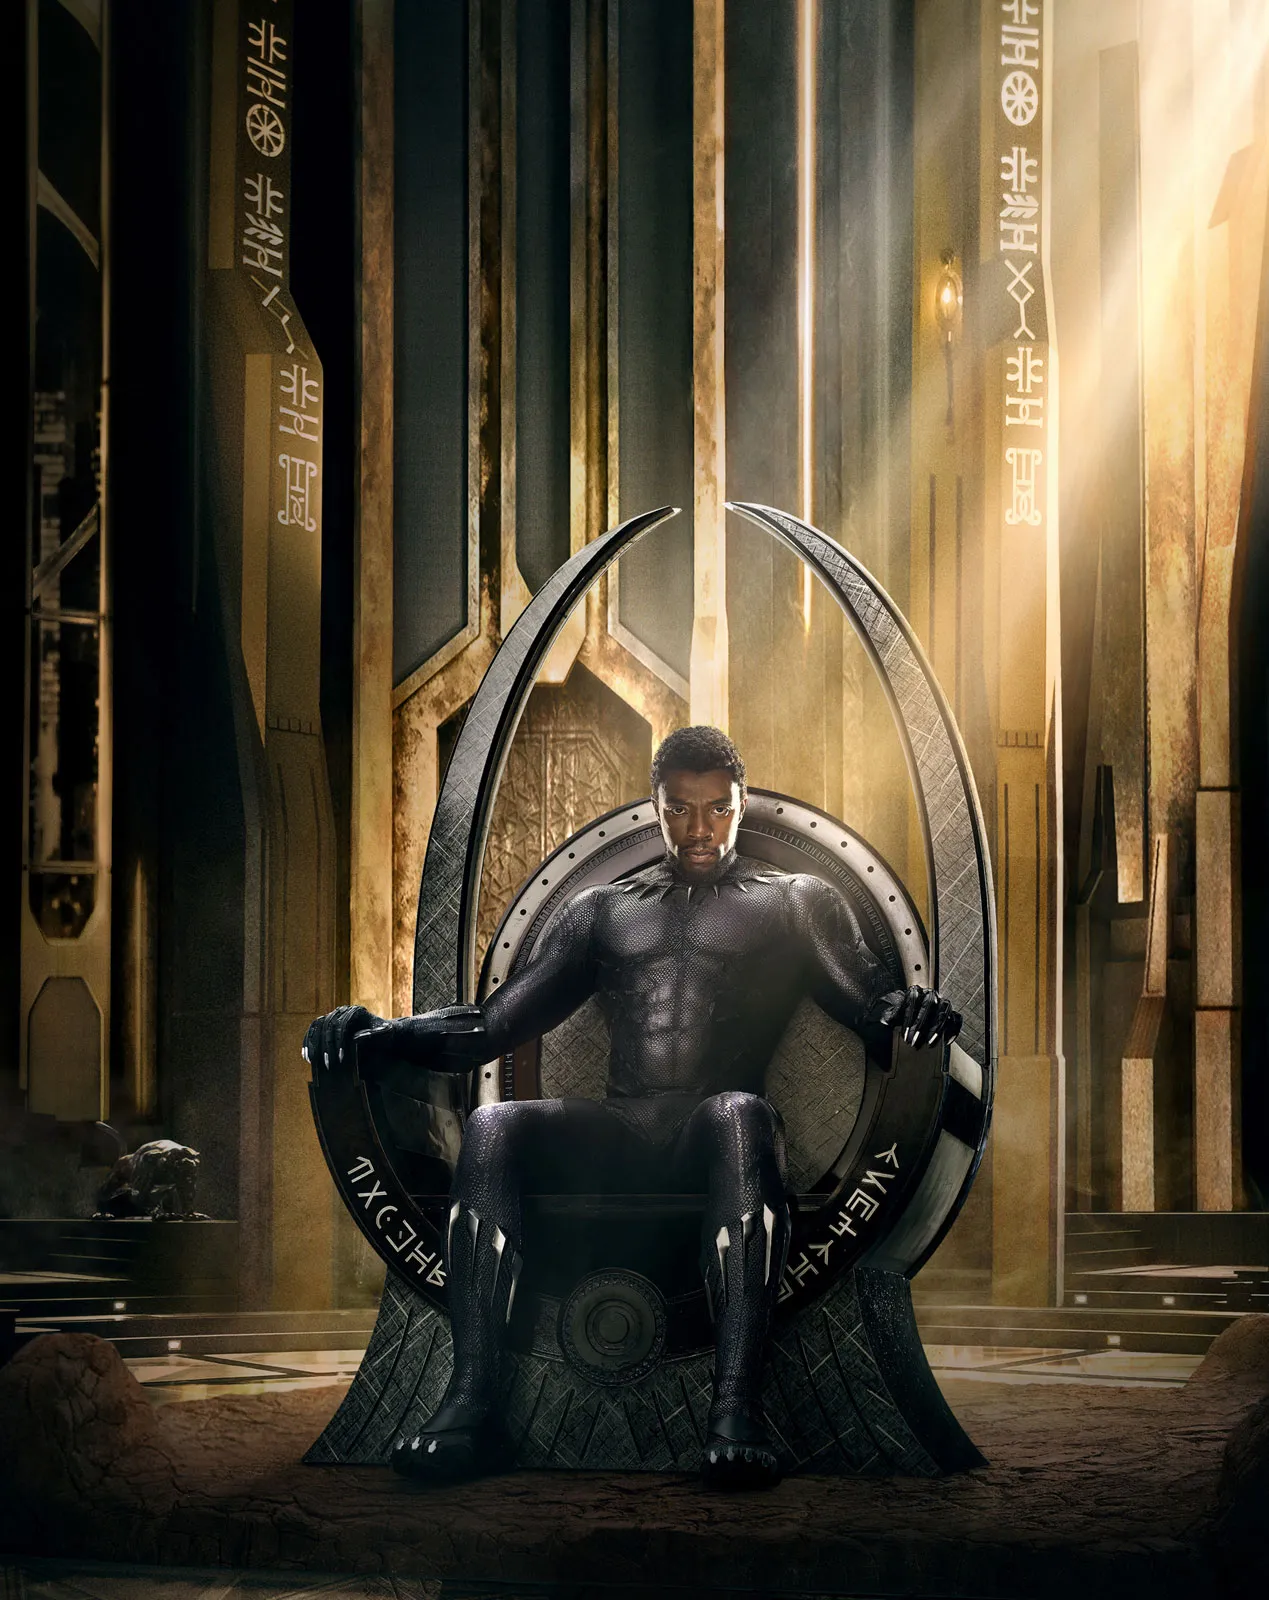 Marvel’s Black Panther: Wakanda Forever Movie OTT Release Date, OTT Platform, Time, and more